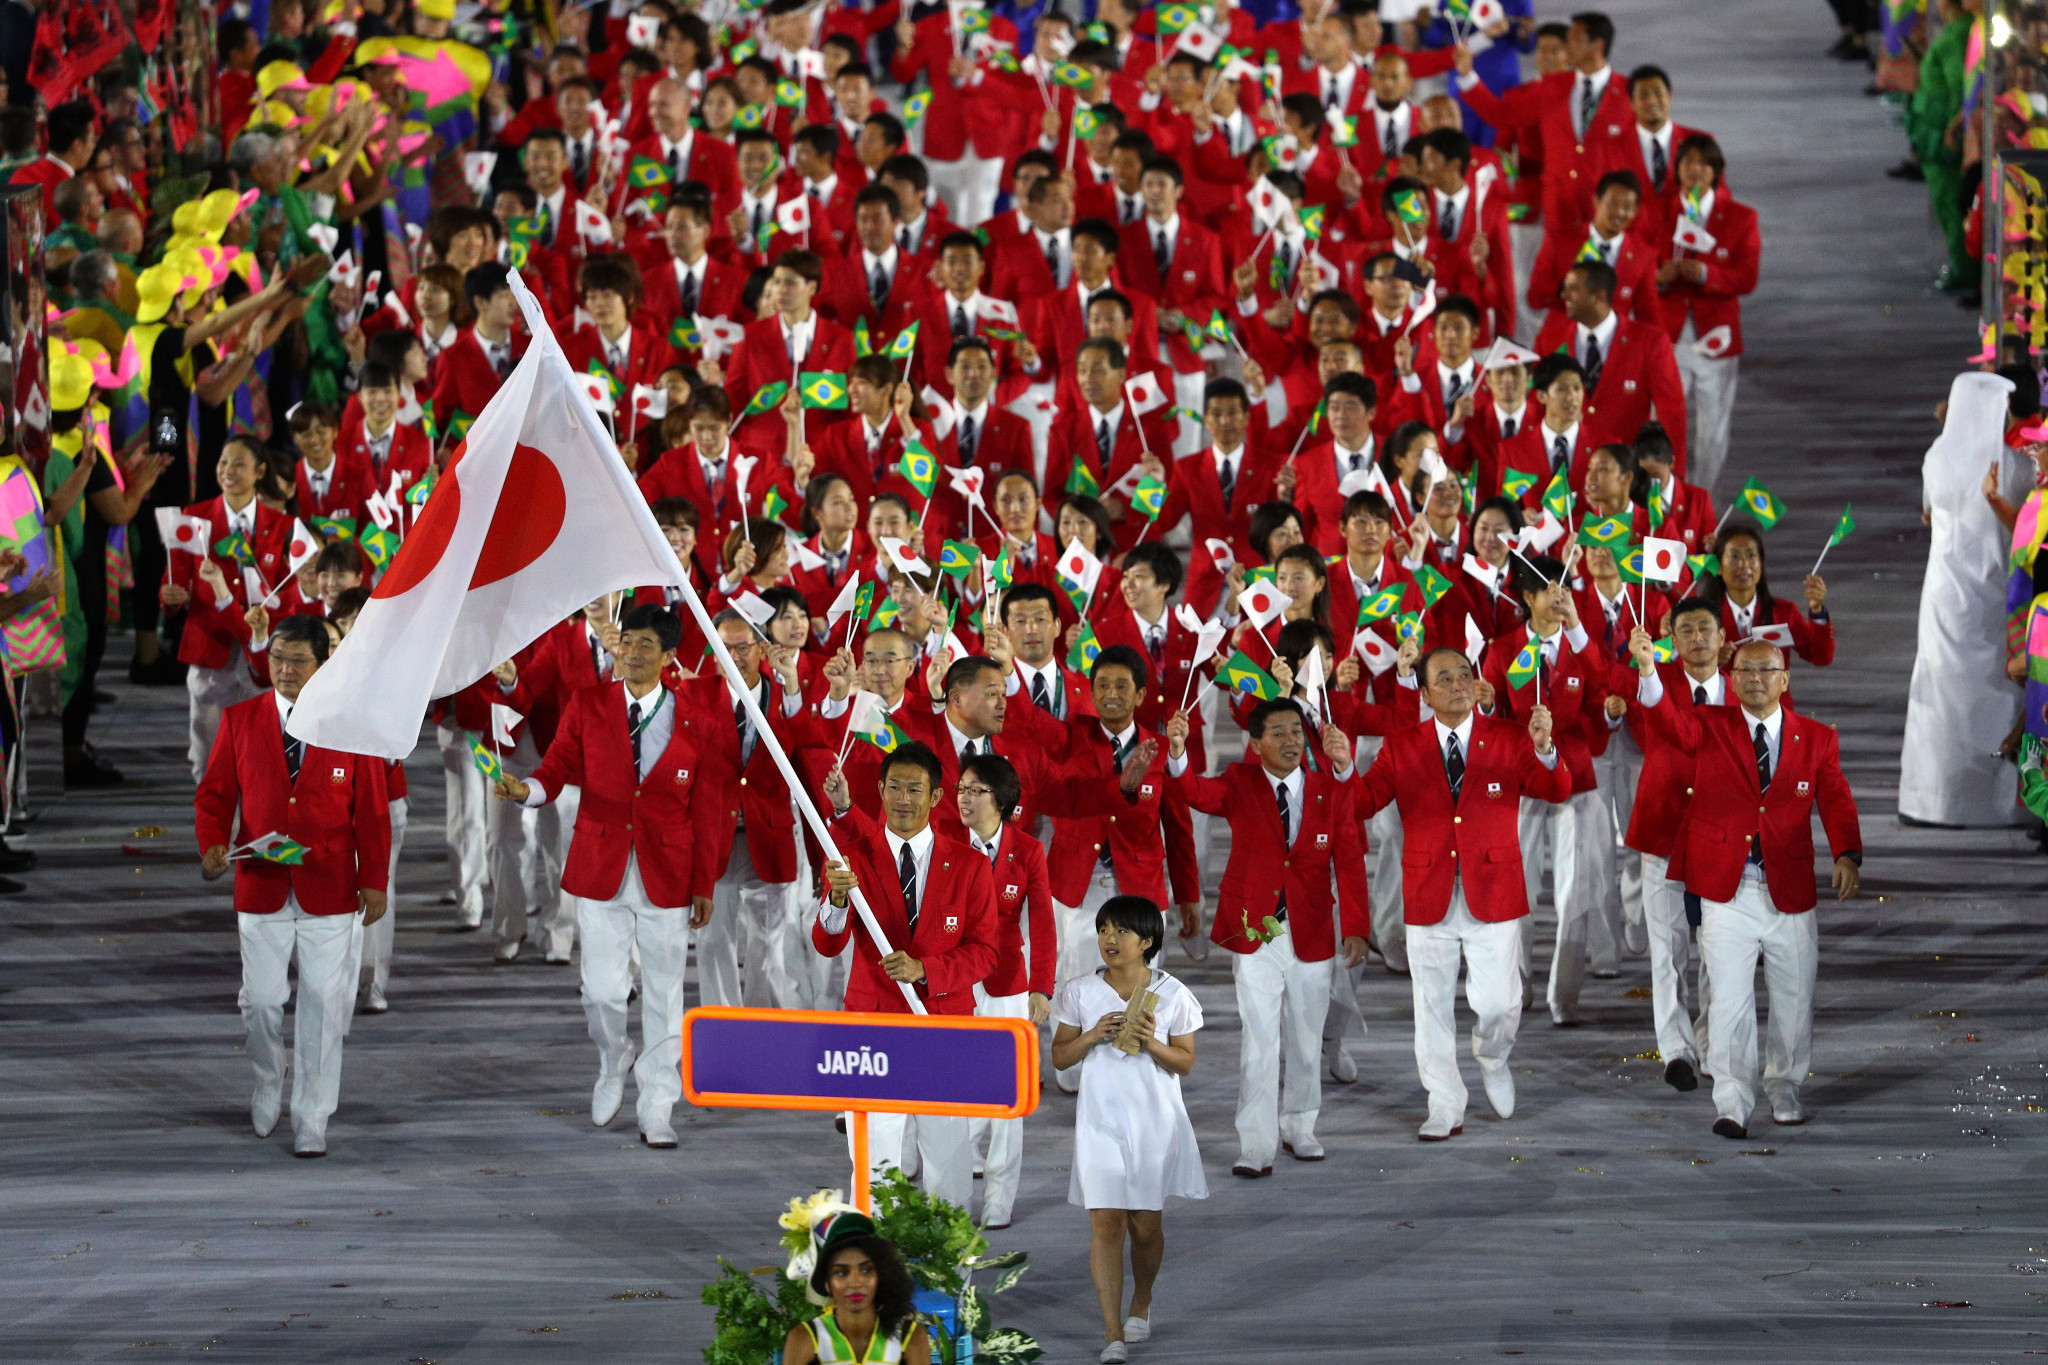 The number of athletes allowed to attend the march in the Opening Ceremony is expected to be restricted ©Getty Images